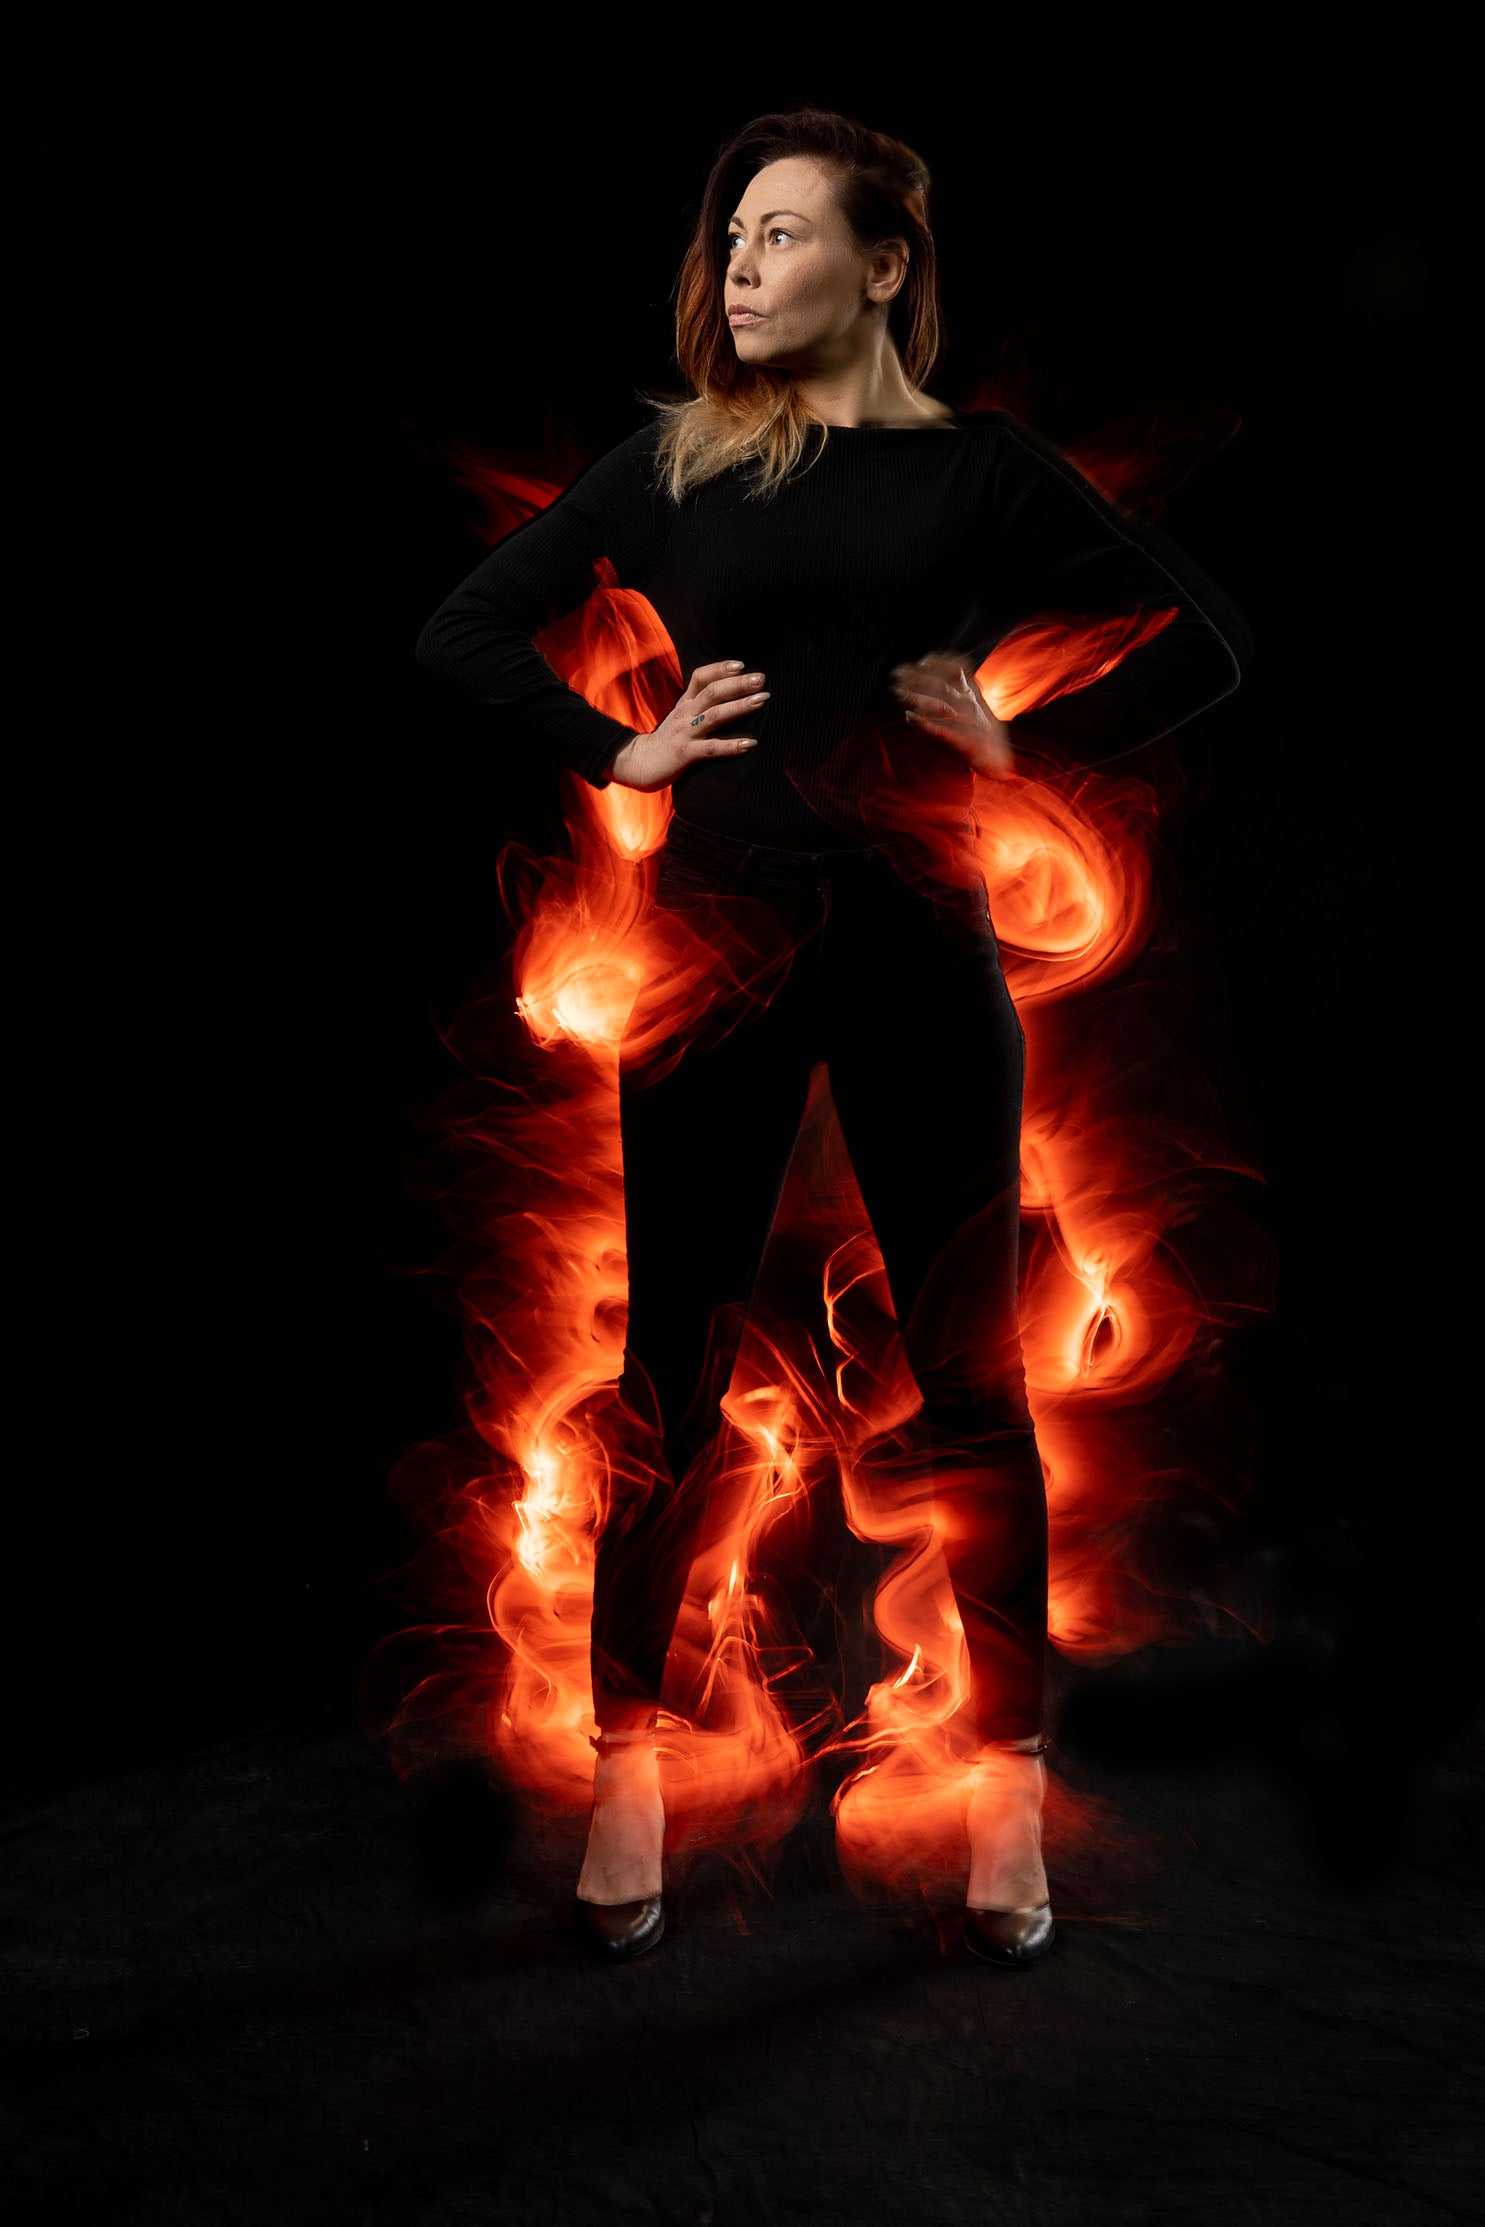 Model on fire with flames from light painting blade